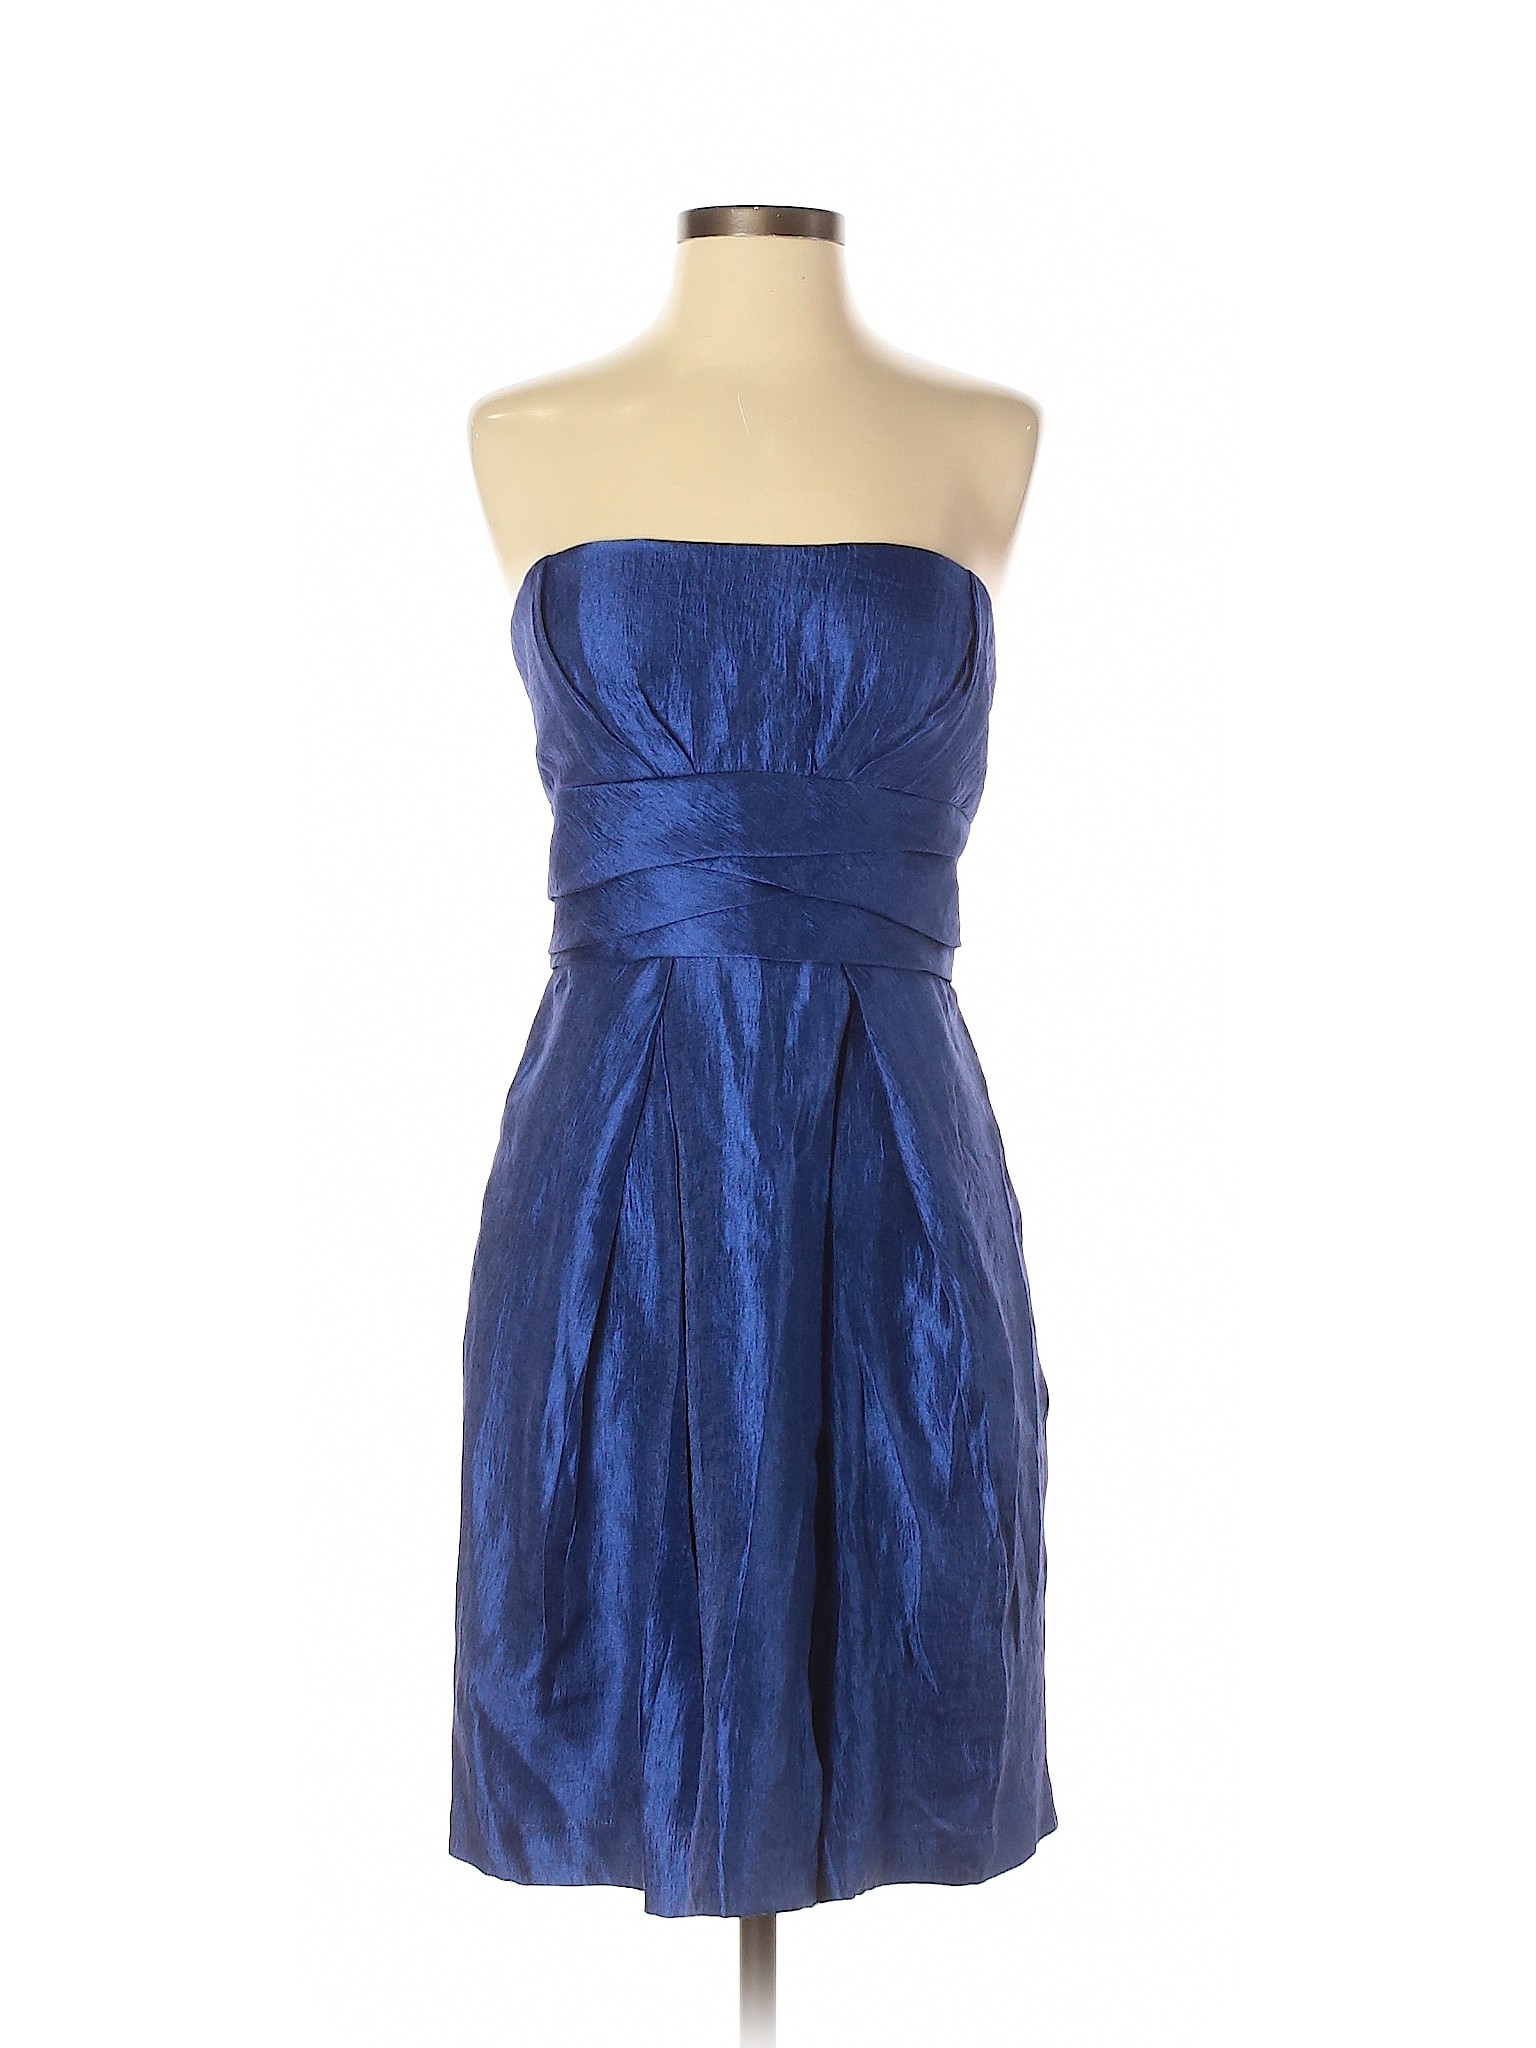 Max and Cleo Women Blue Cocktail Dress 6 | eBay